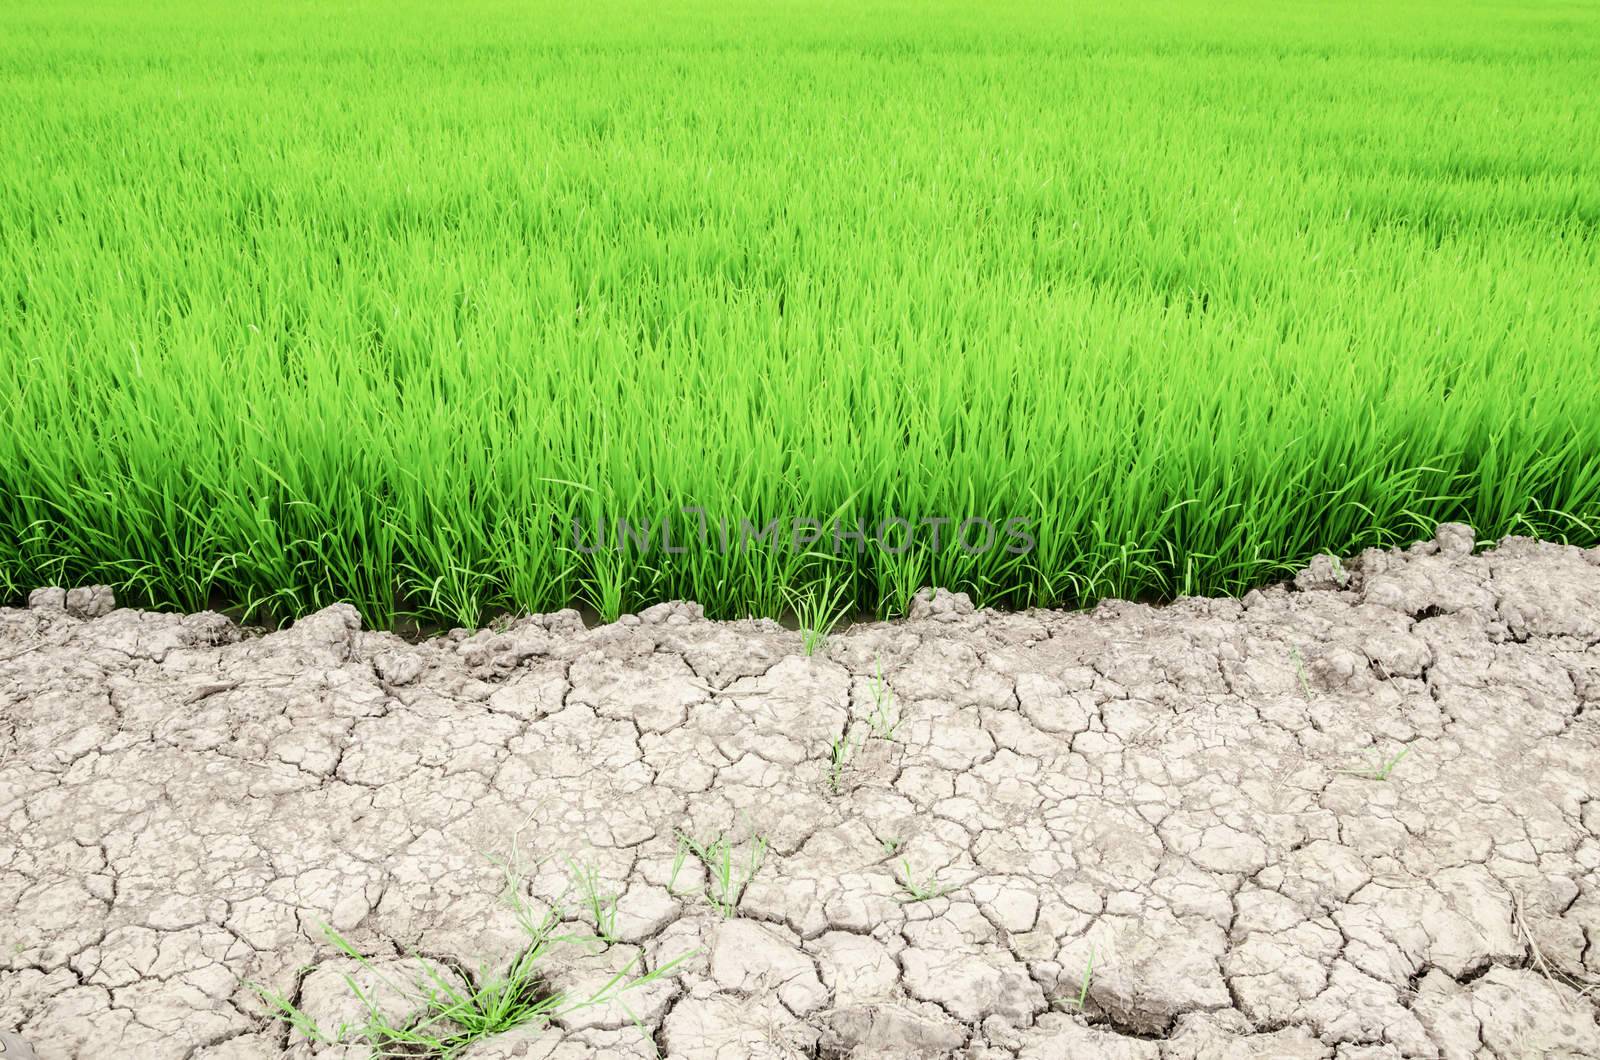 Dry crack earth at rice field in Thailand.